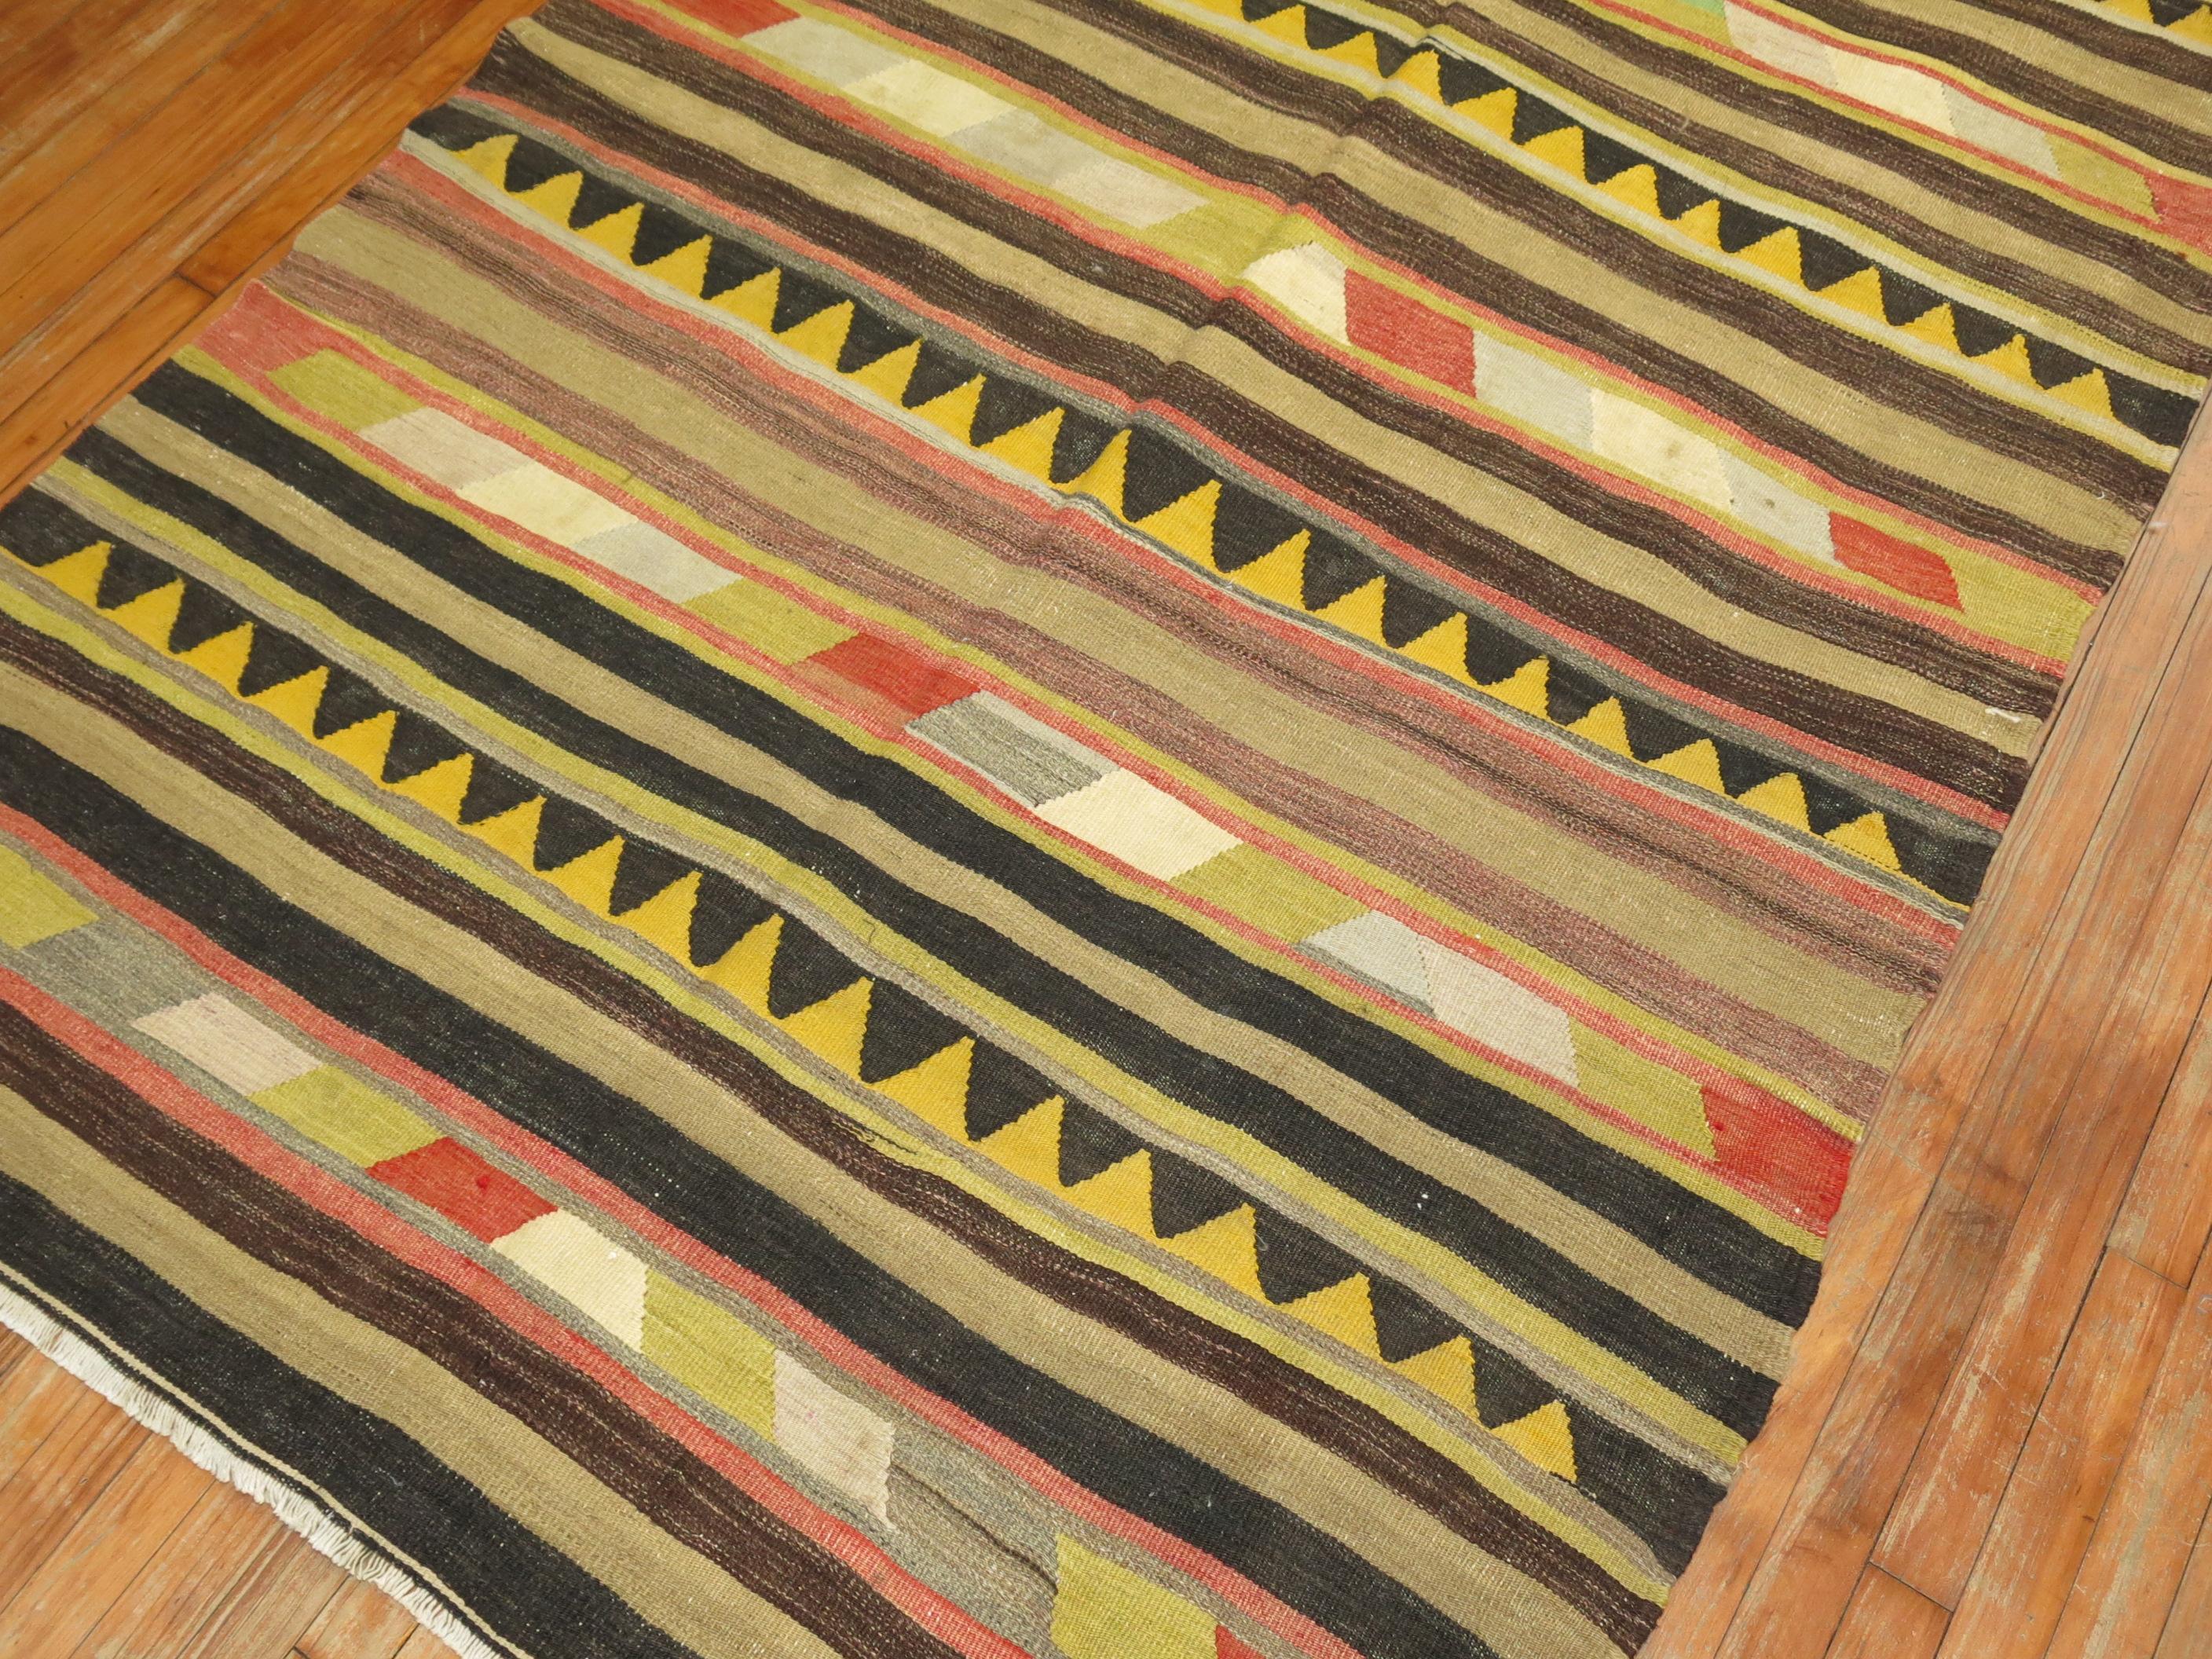 Primitive Tribal looking Turkish Kilim flat-weave from the mid-20th century. 
Soft browns, yellows, reds are the main colors.

Measures: 5'1